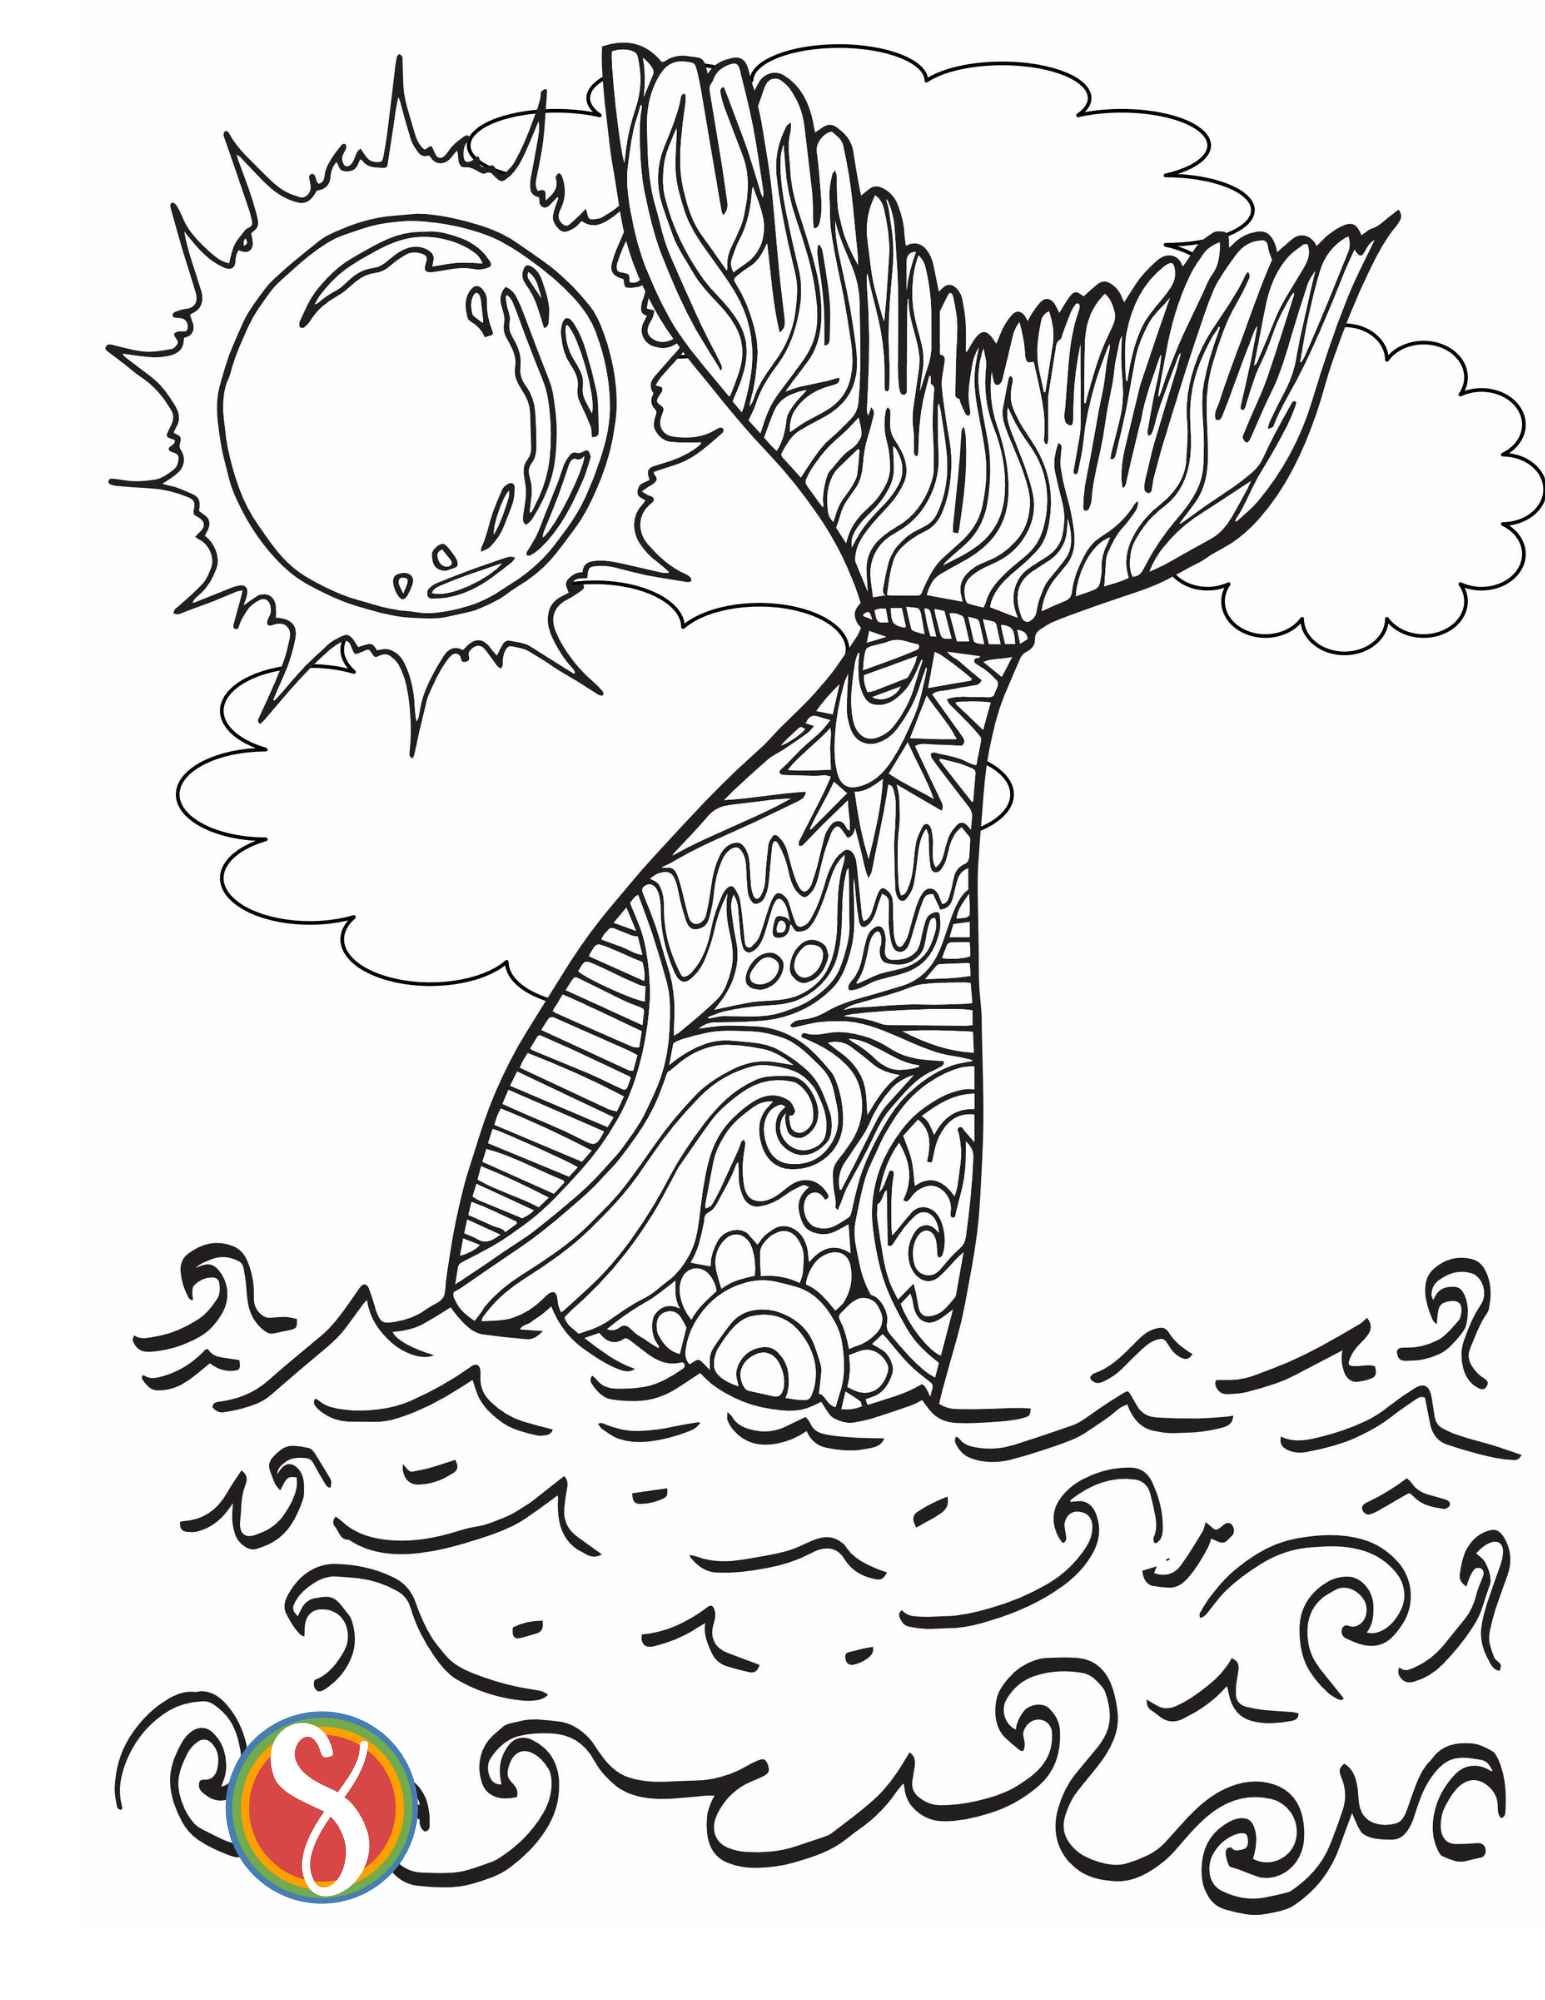 A lage mermaid tail full of colorable doodles is coming out of colorable waves with a colorable sun and coloring clouds in the background